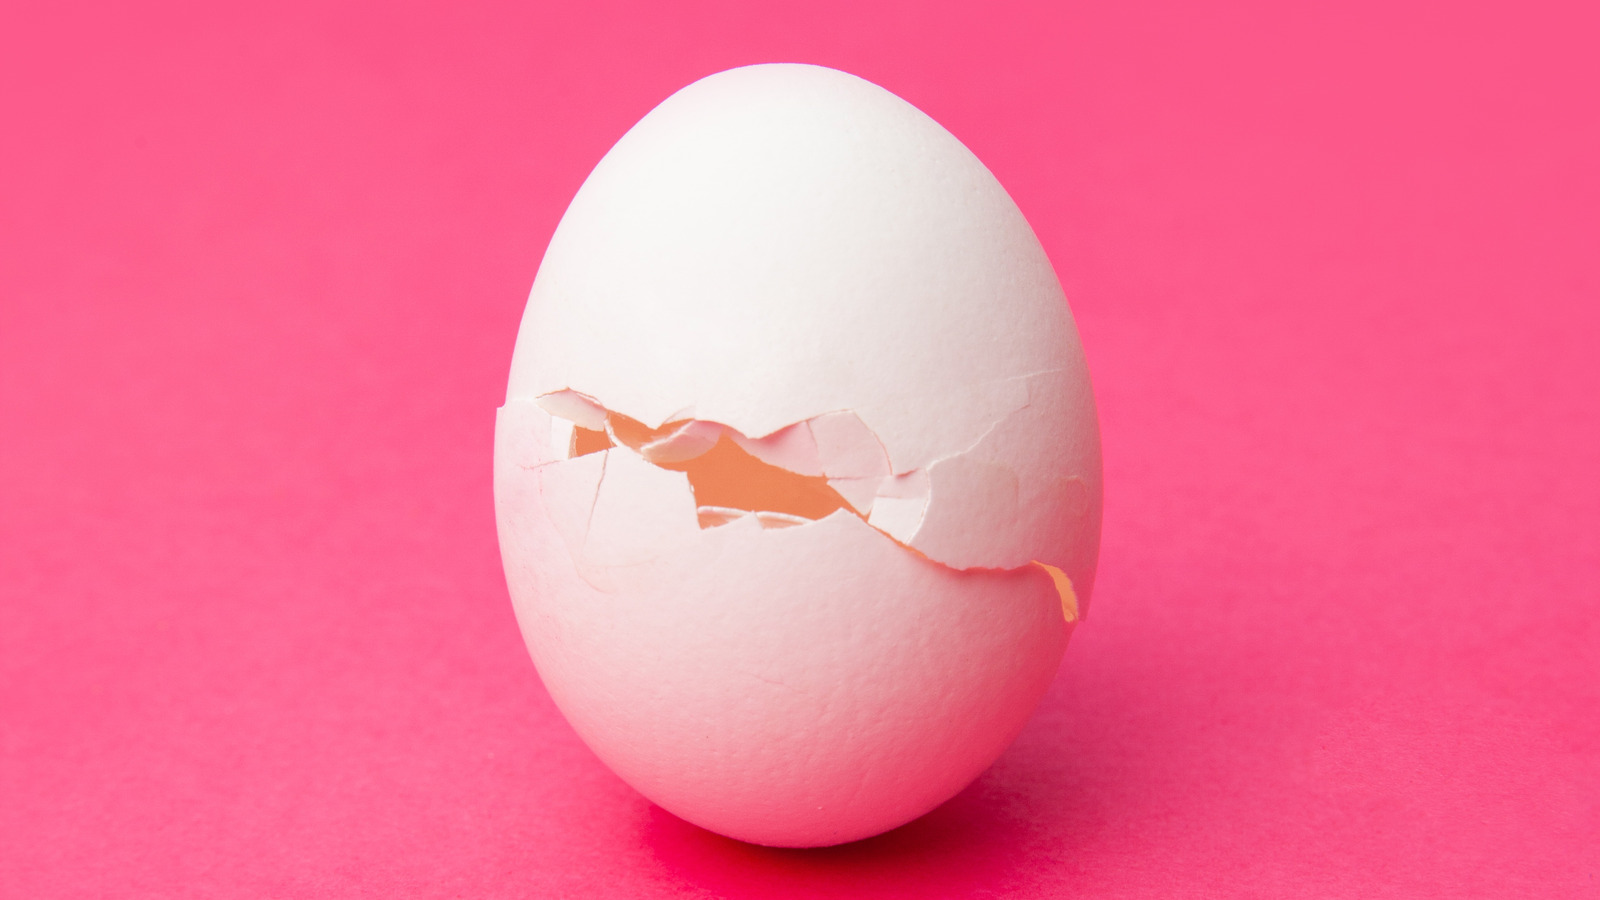 Breaking eggs down: The grades, labels and alternatives